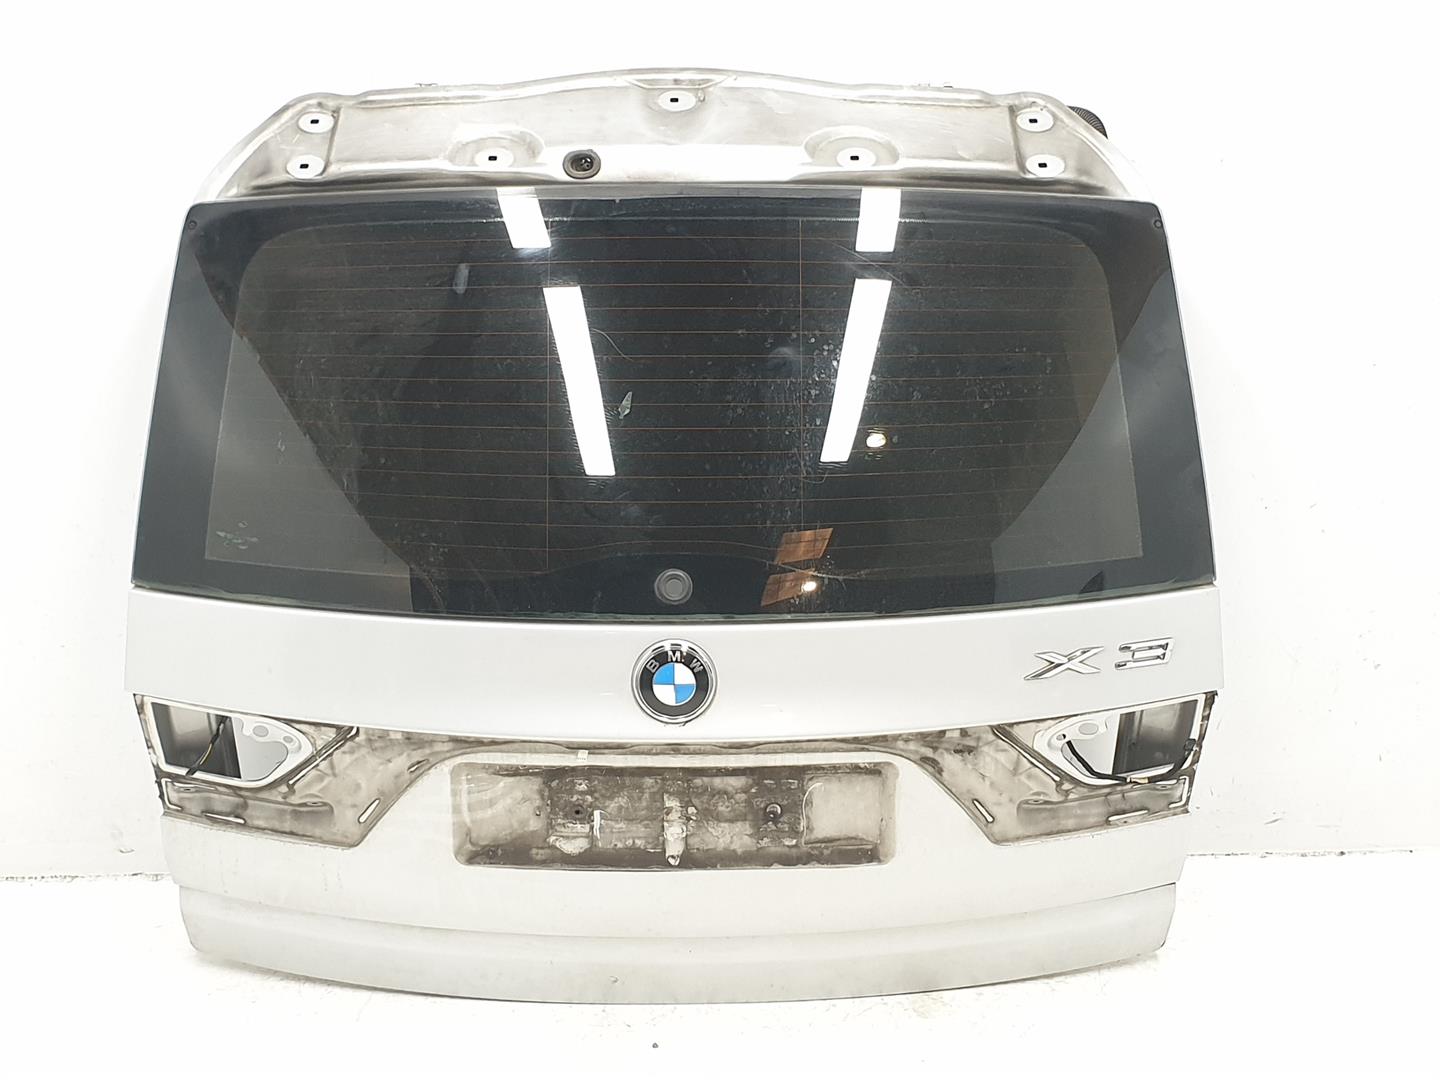 BMW X3 E83 (2003-2010) Bootlid Rear Boot 41003452197, 41003452197 24238163